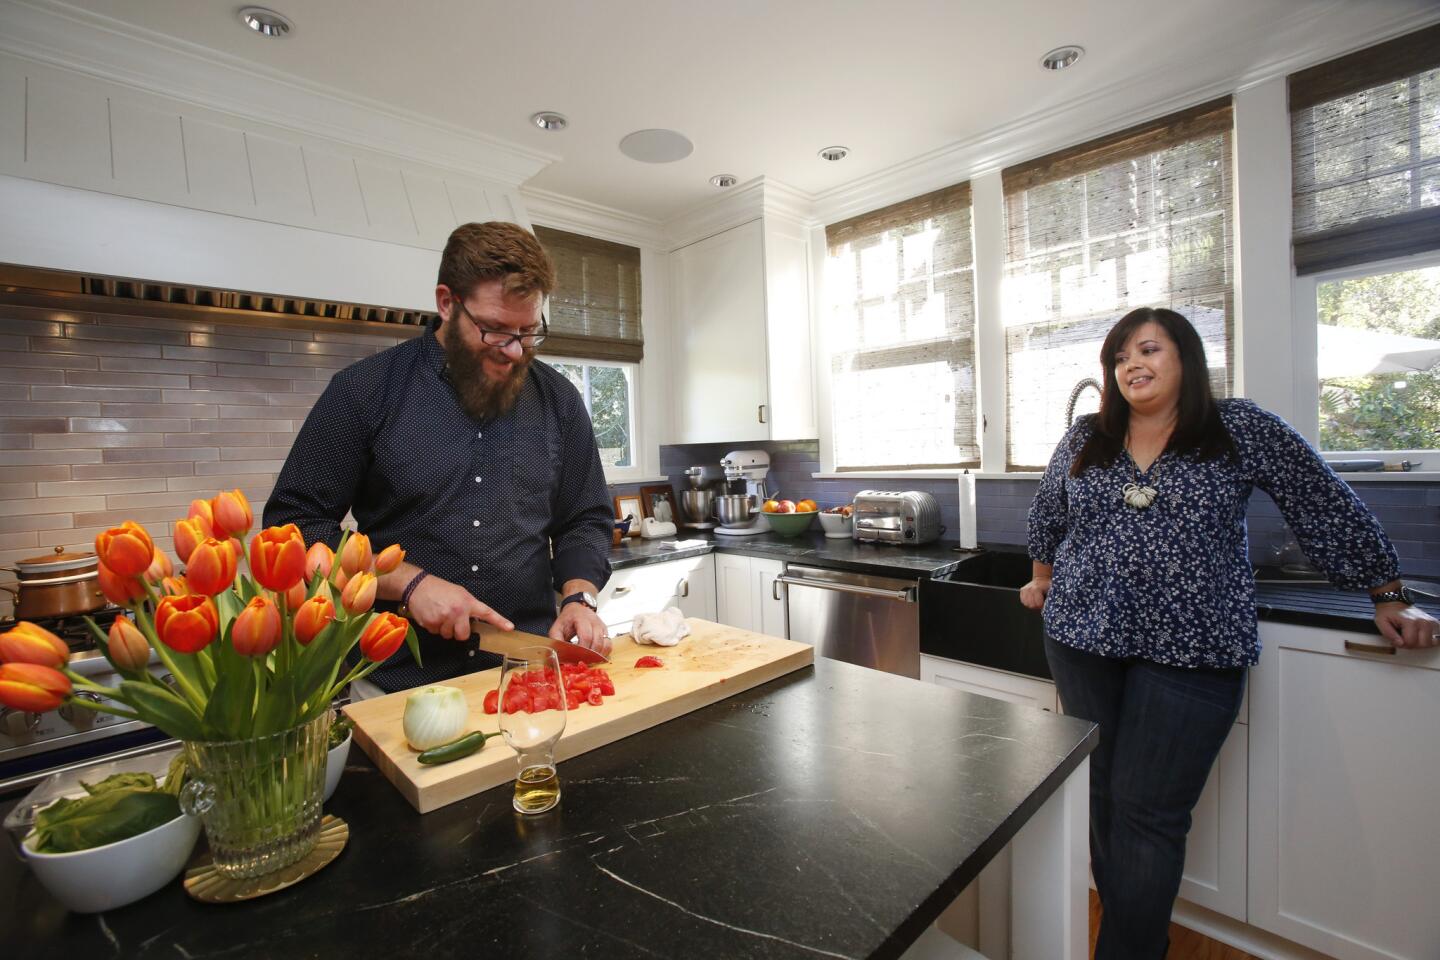 As his pastry chef wife, Crisi Echiverri, watches, Providence chef Michael Cimarusti prepares an after-school pasta dish for their kids in their 1912 South Pasadena home.